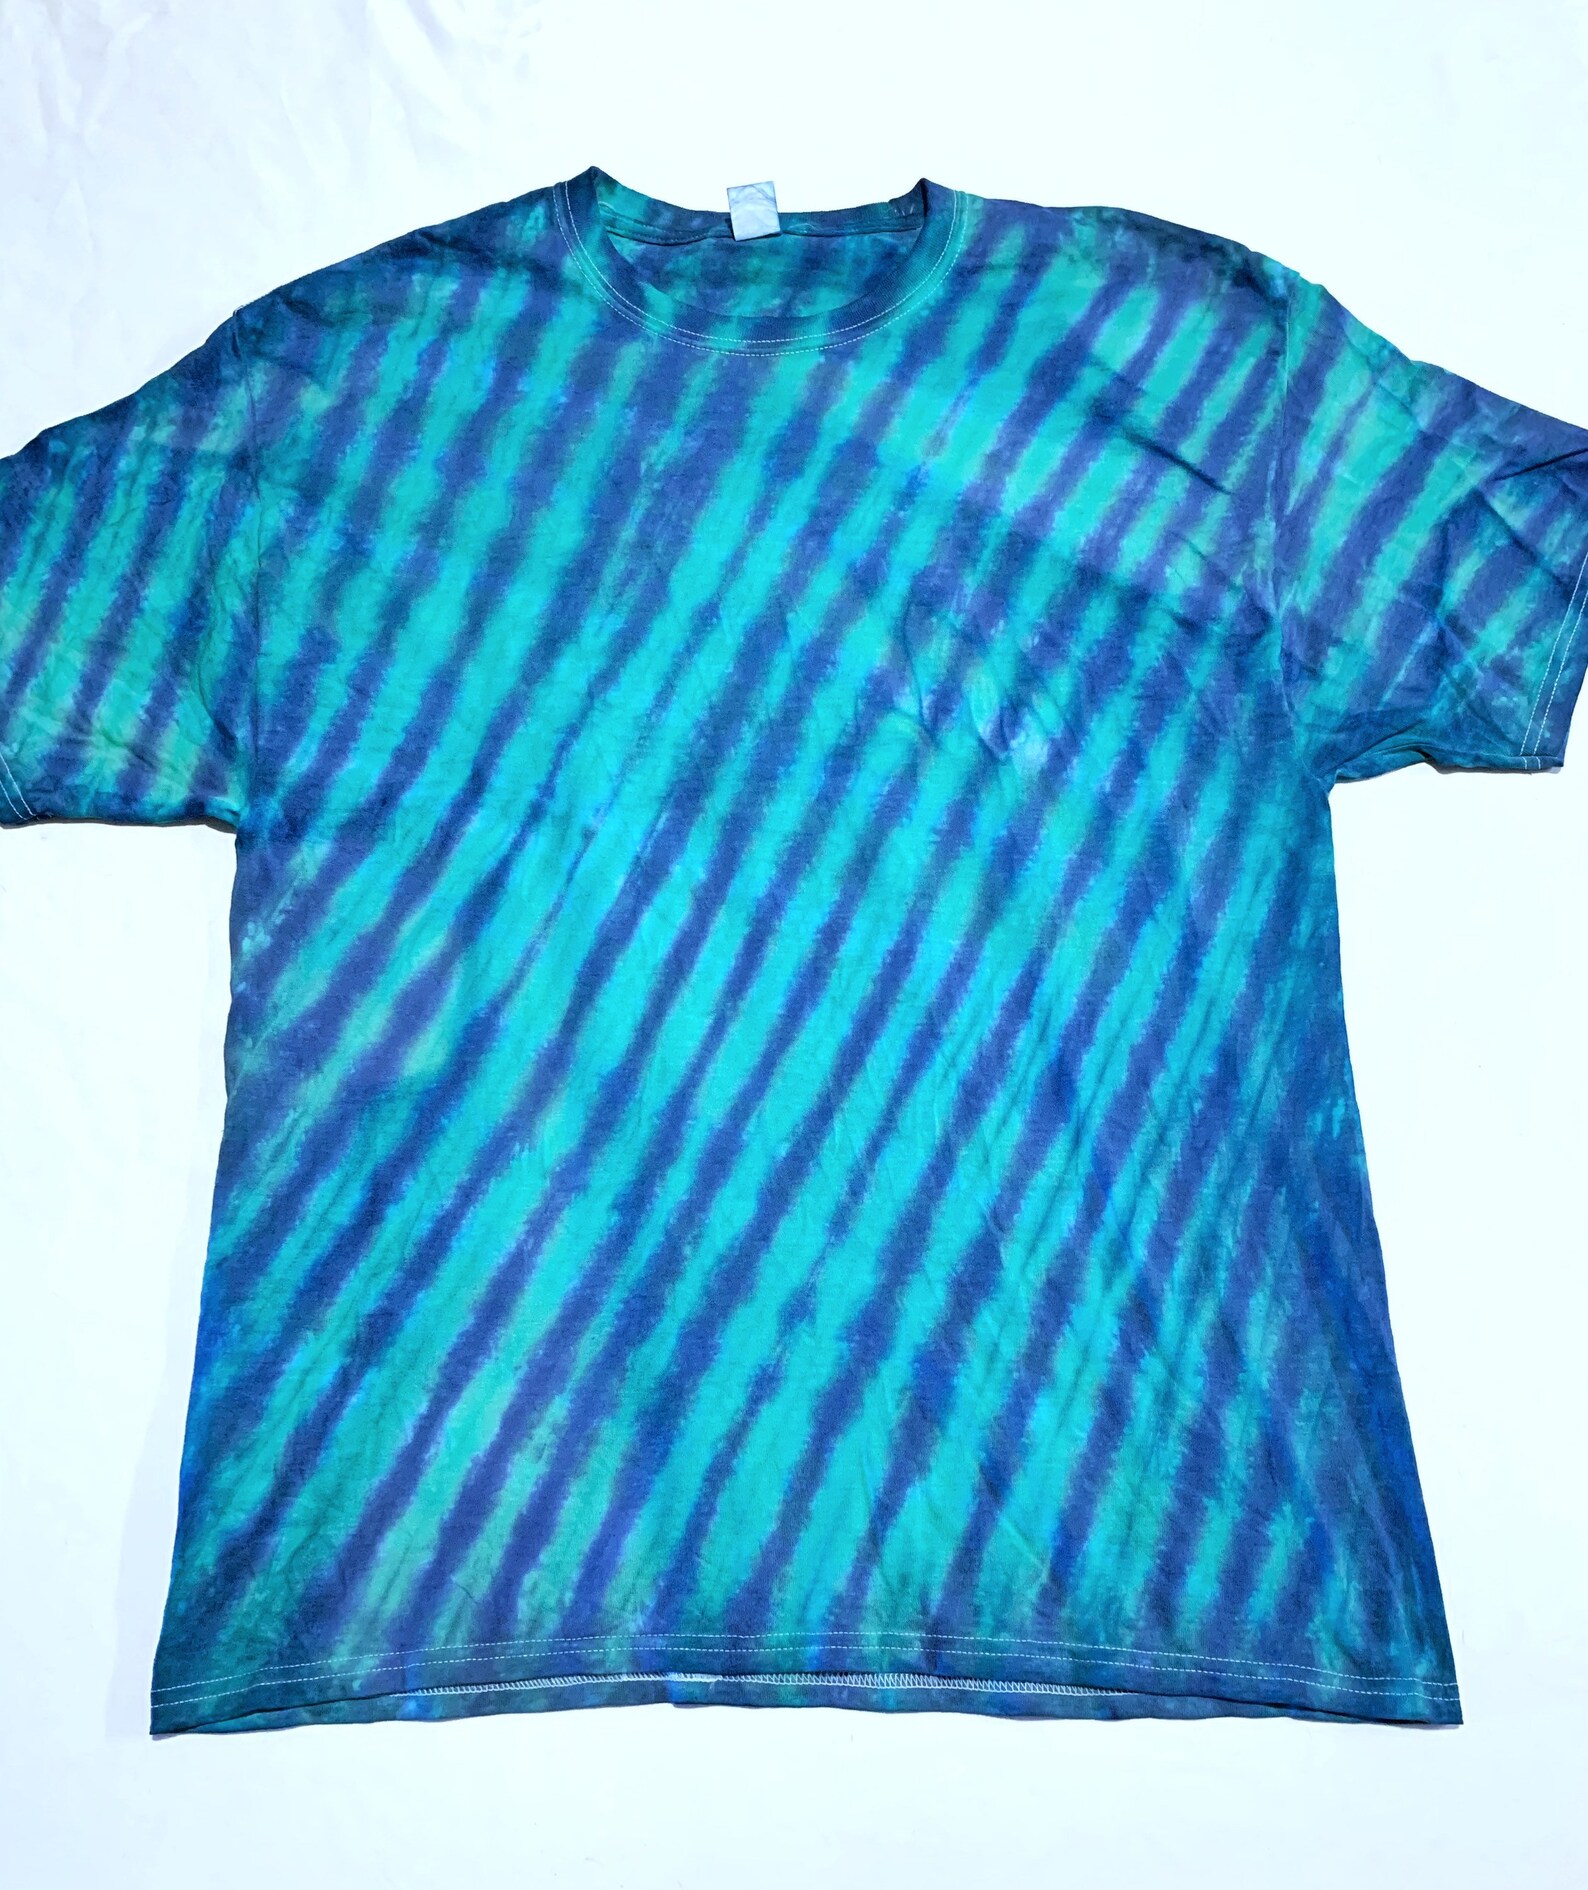 Unisex XL blue and green striped tie dye t shirt hand made | Etsy